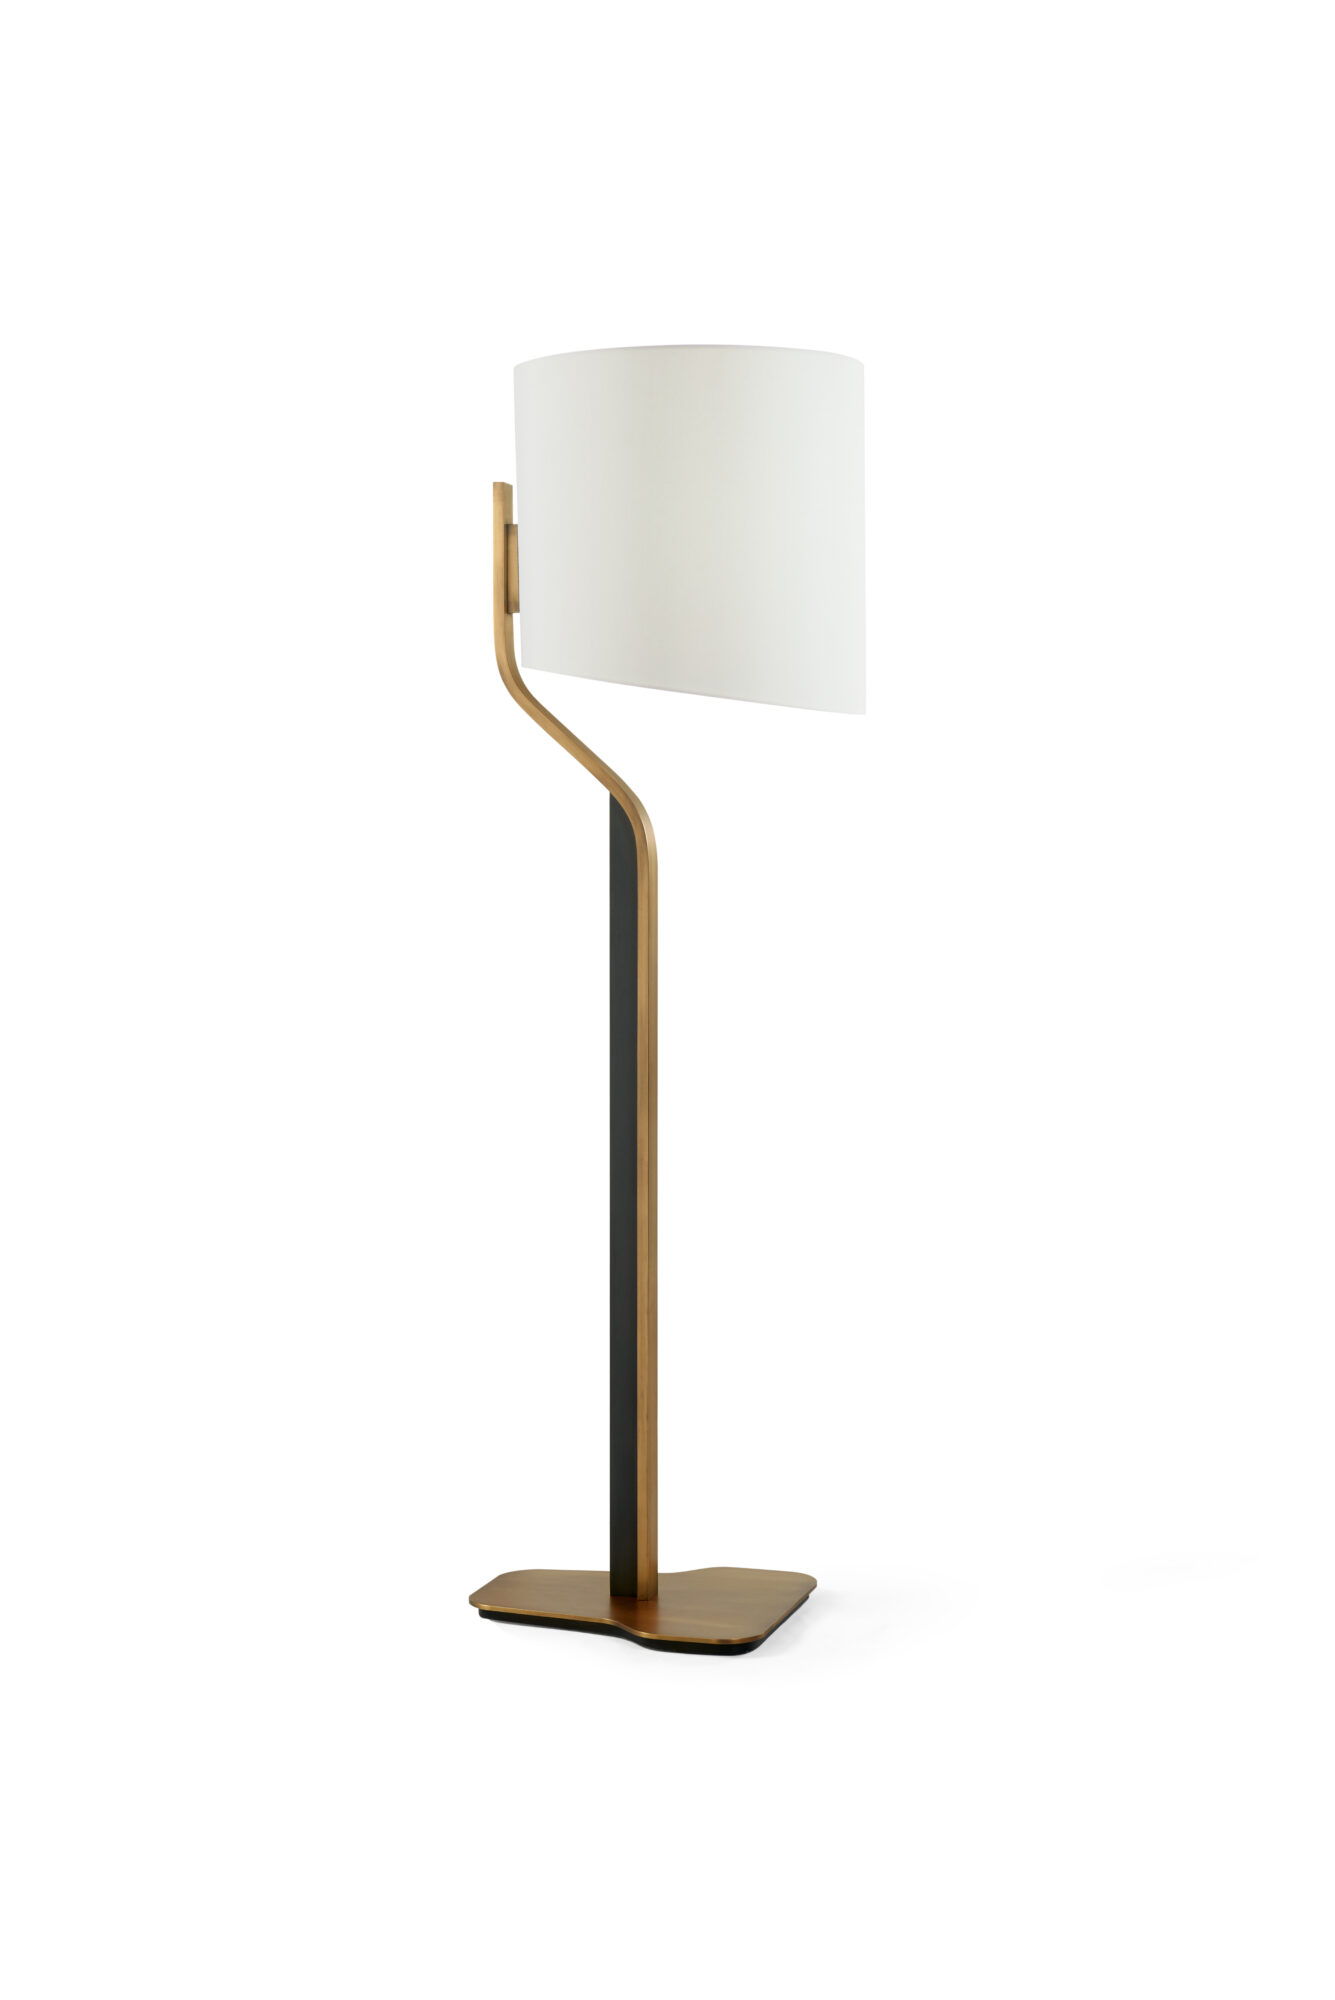 large white floor lamp inspired by this Frank Lloyd Wright